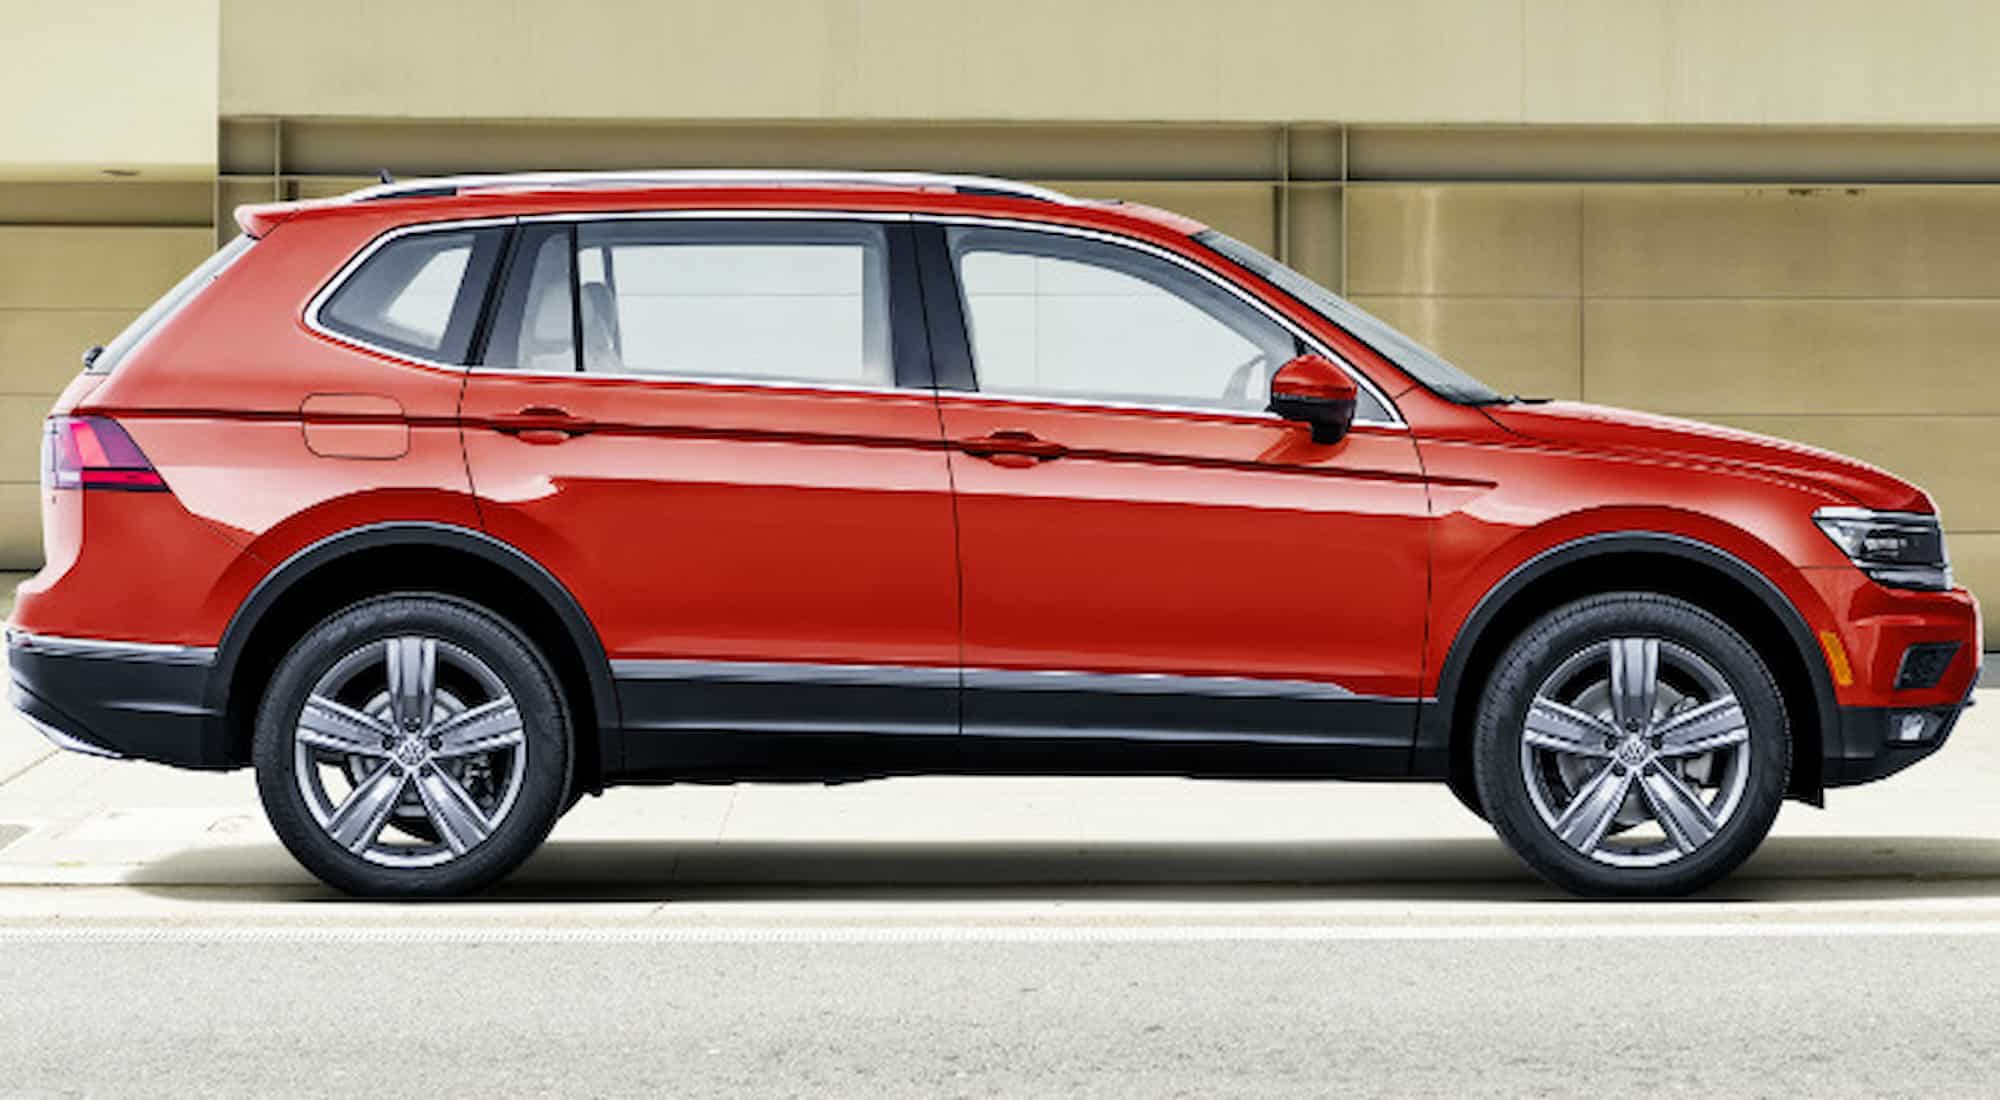 2018 VW Tiguan side view red o